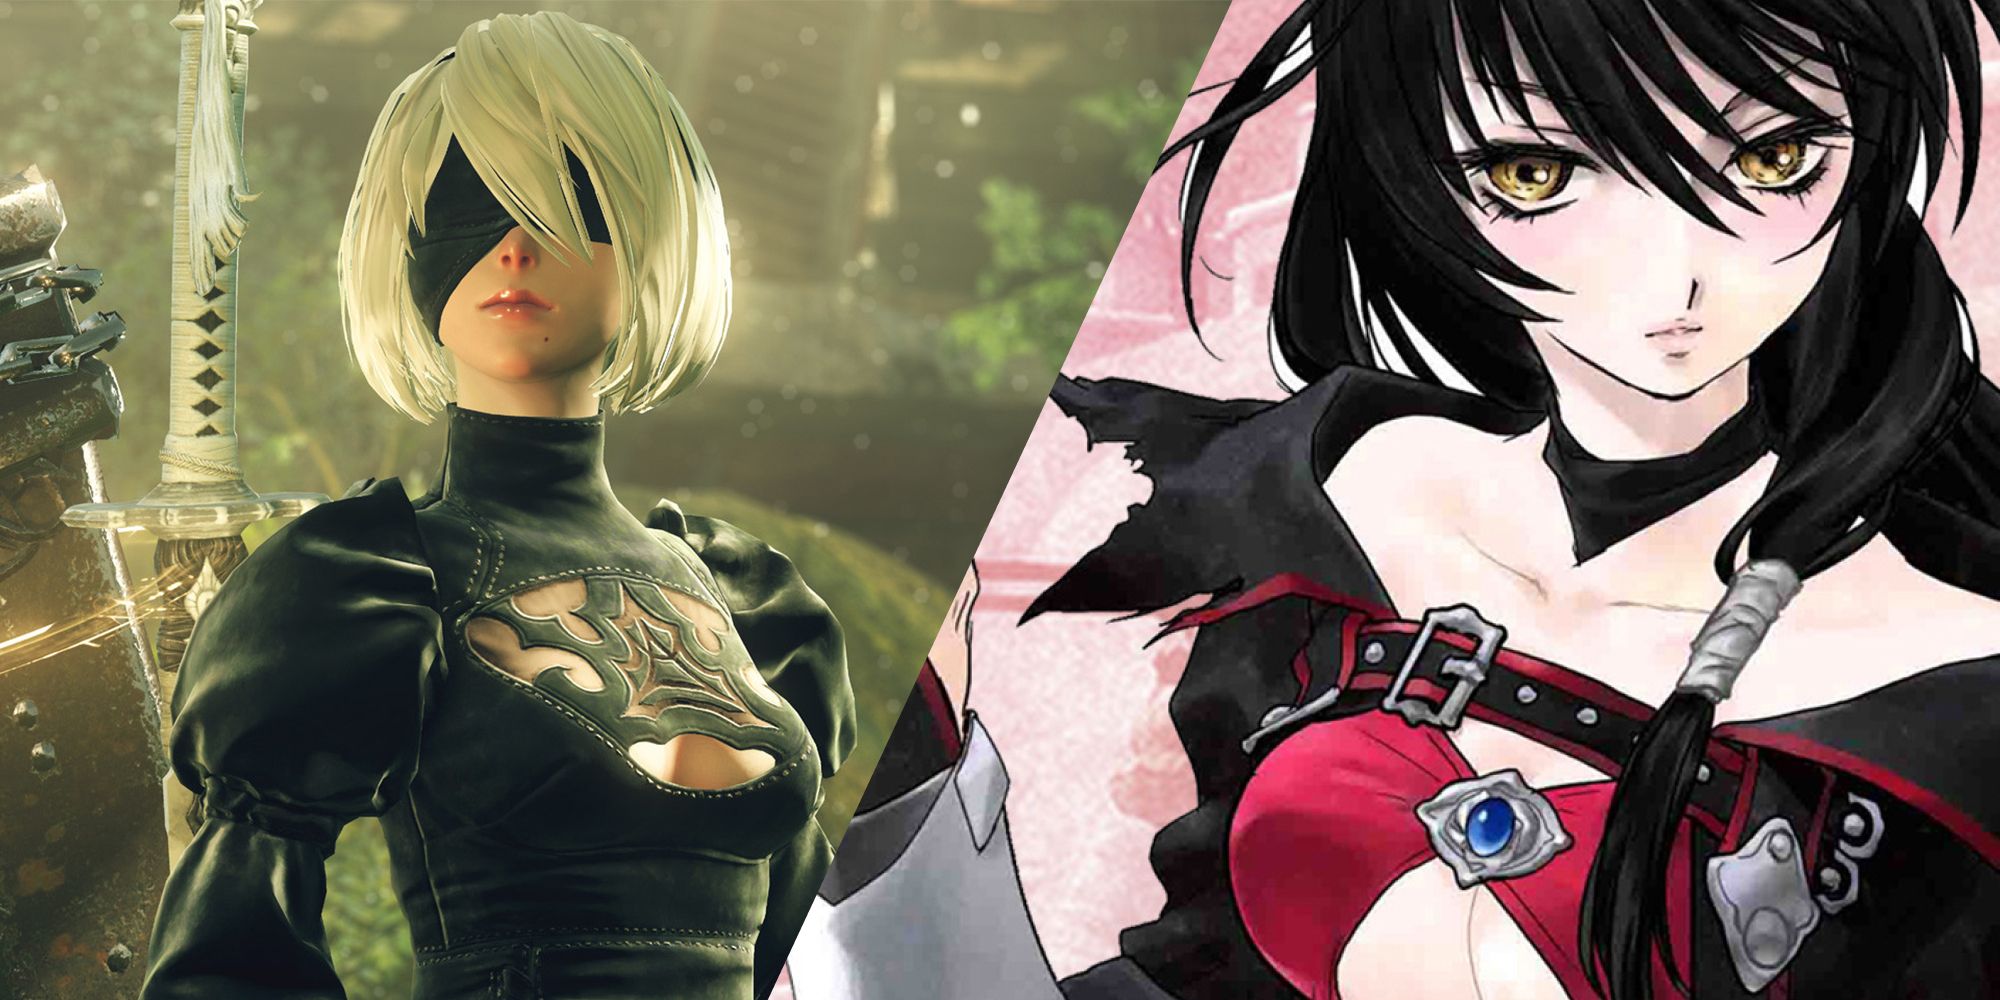 JRPG's 2B From Nier Automata And Velvet Crowe From Tales Of Berseria